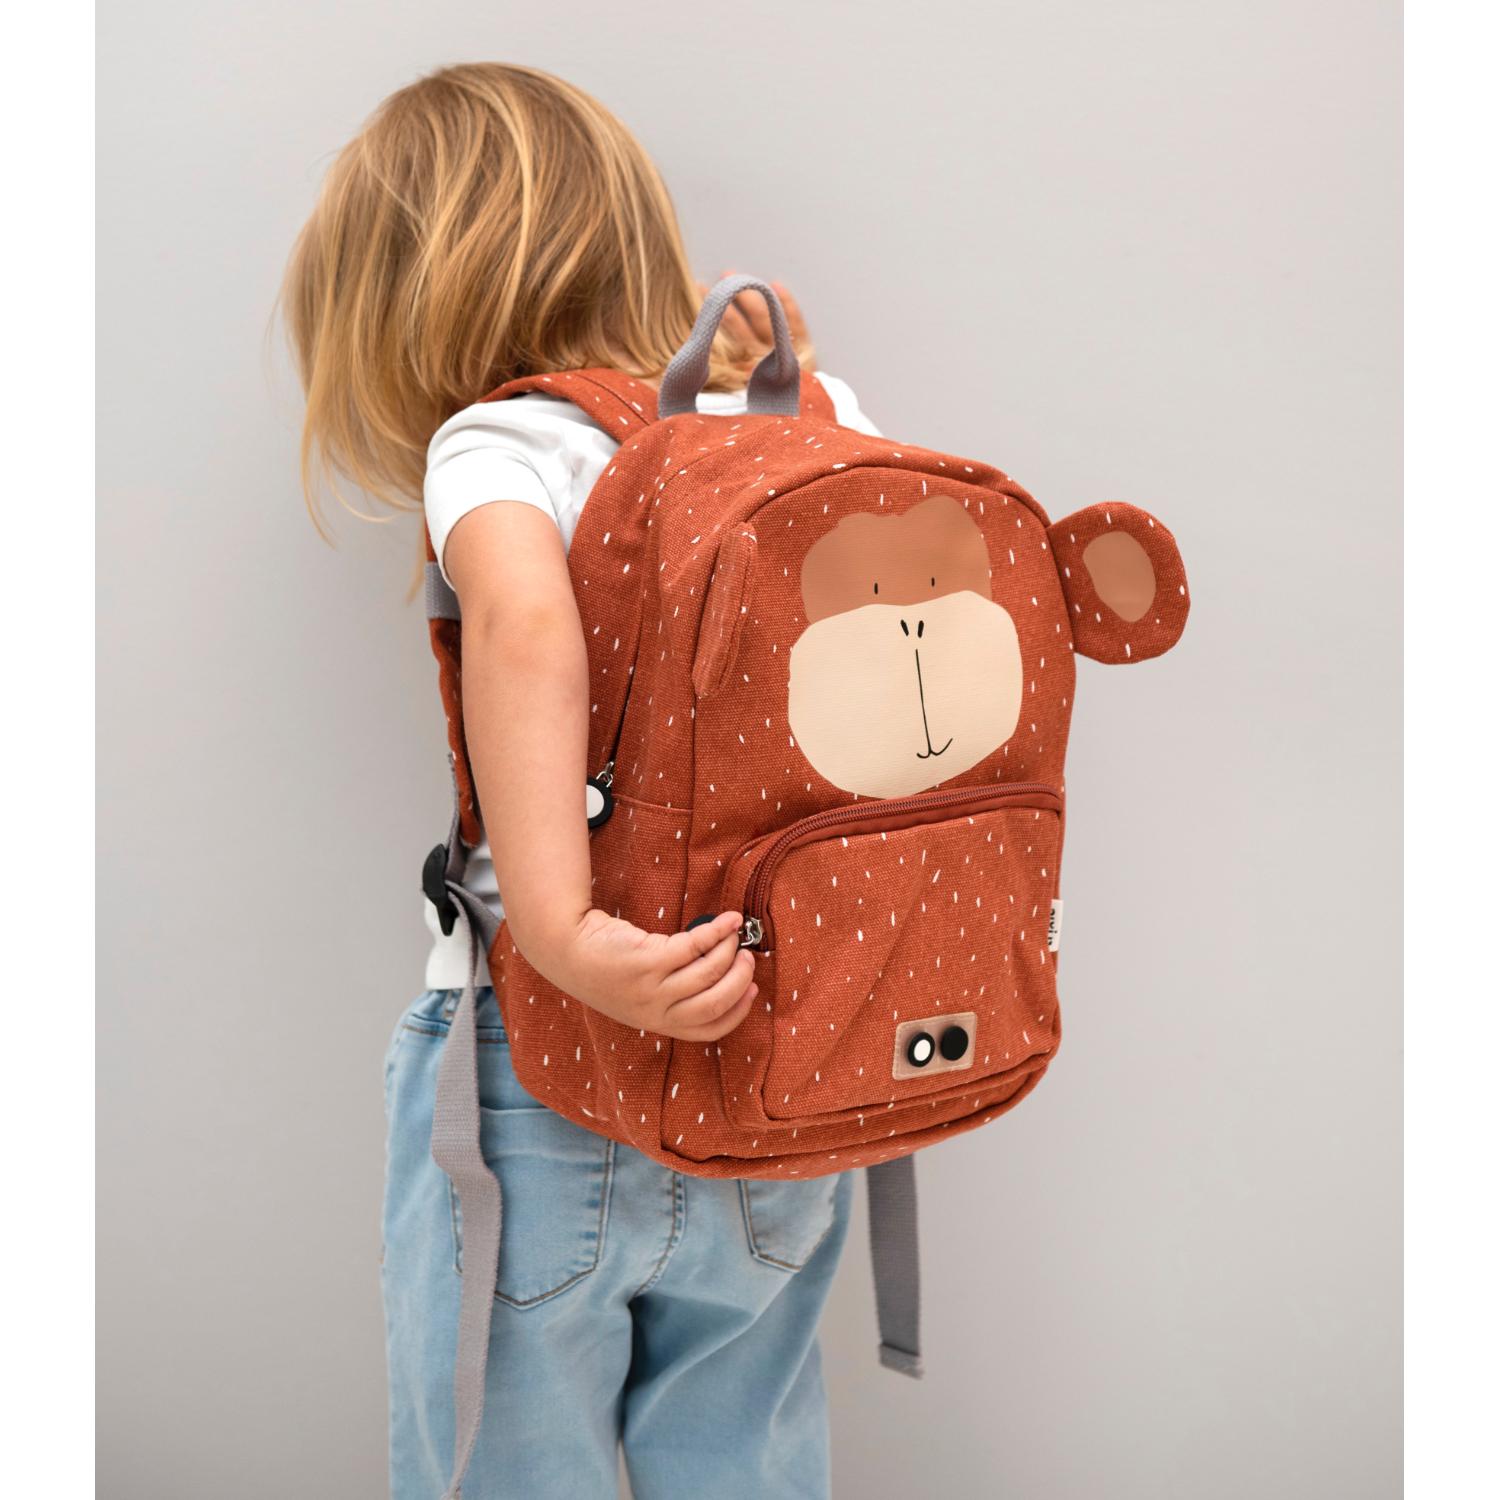 Trixie Mr. Monkey Backpack | Kid’s Backpack for Creche, Nursery & School | Lifestyle: Child with Backpack - Side View | BeoVERDE.ie